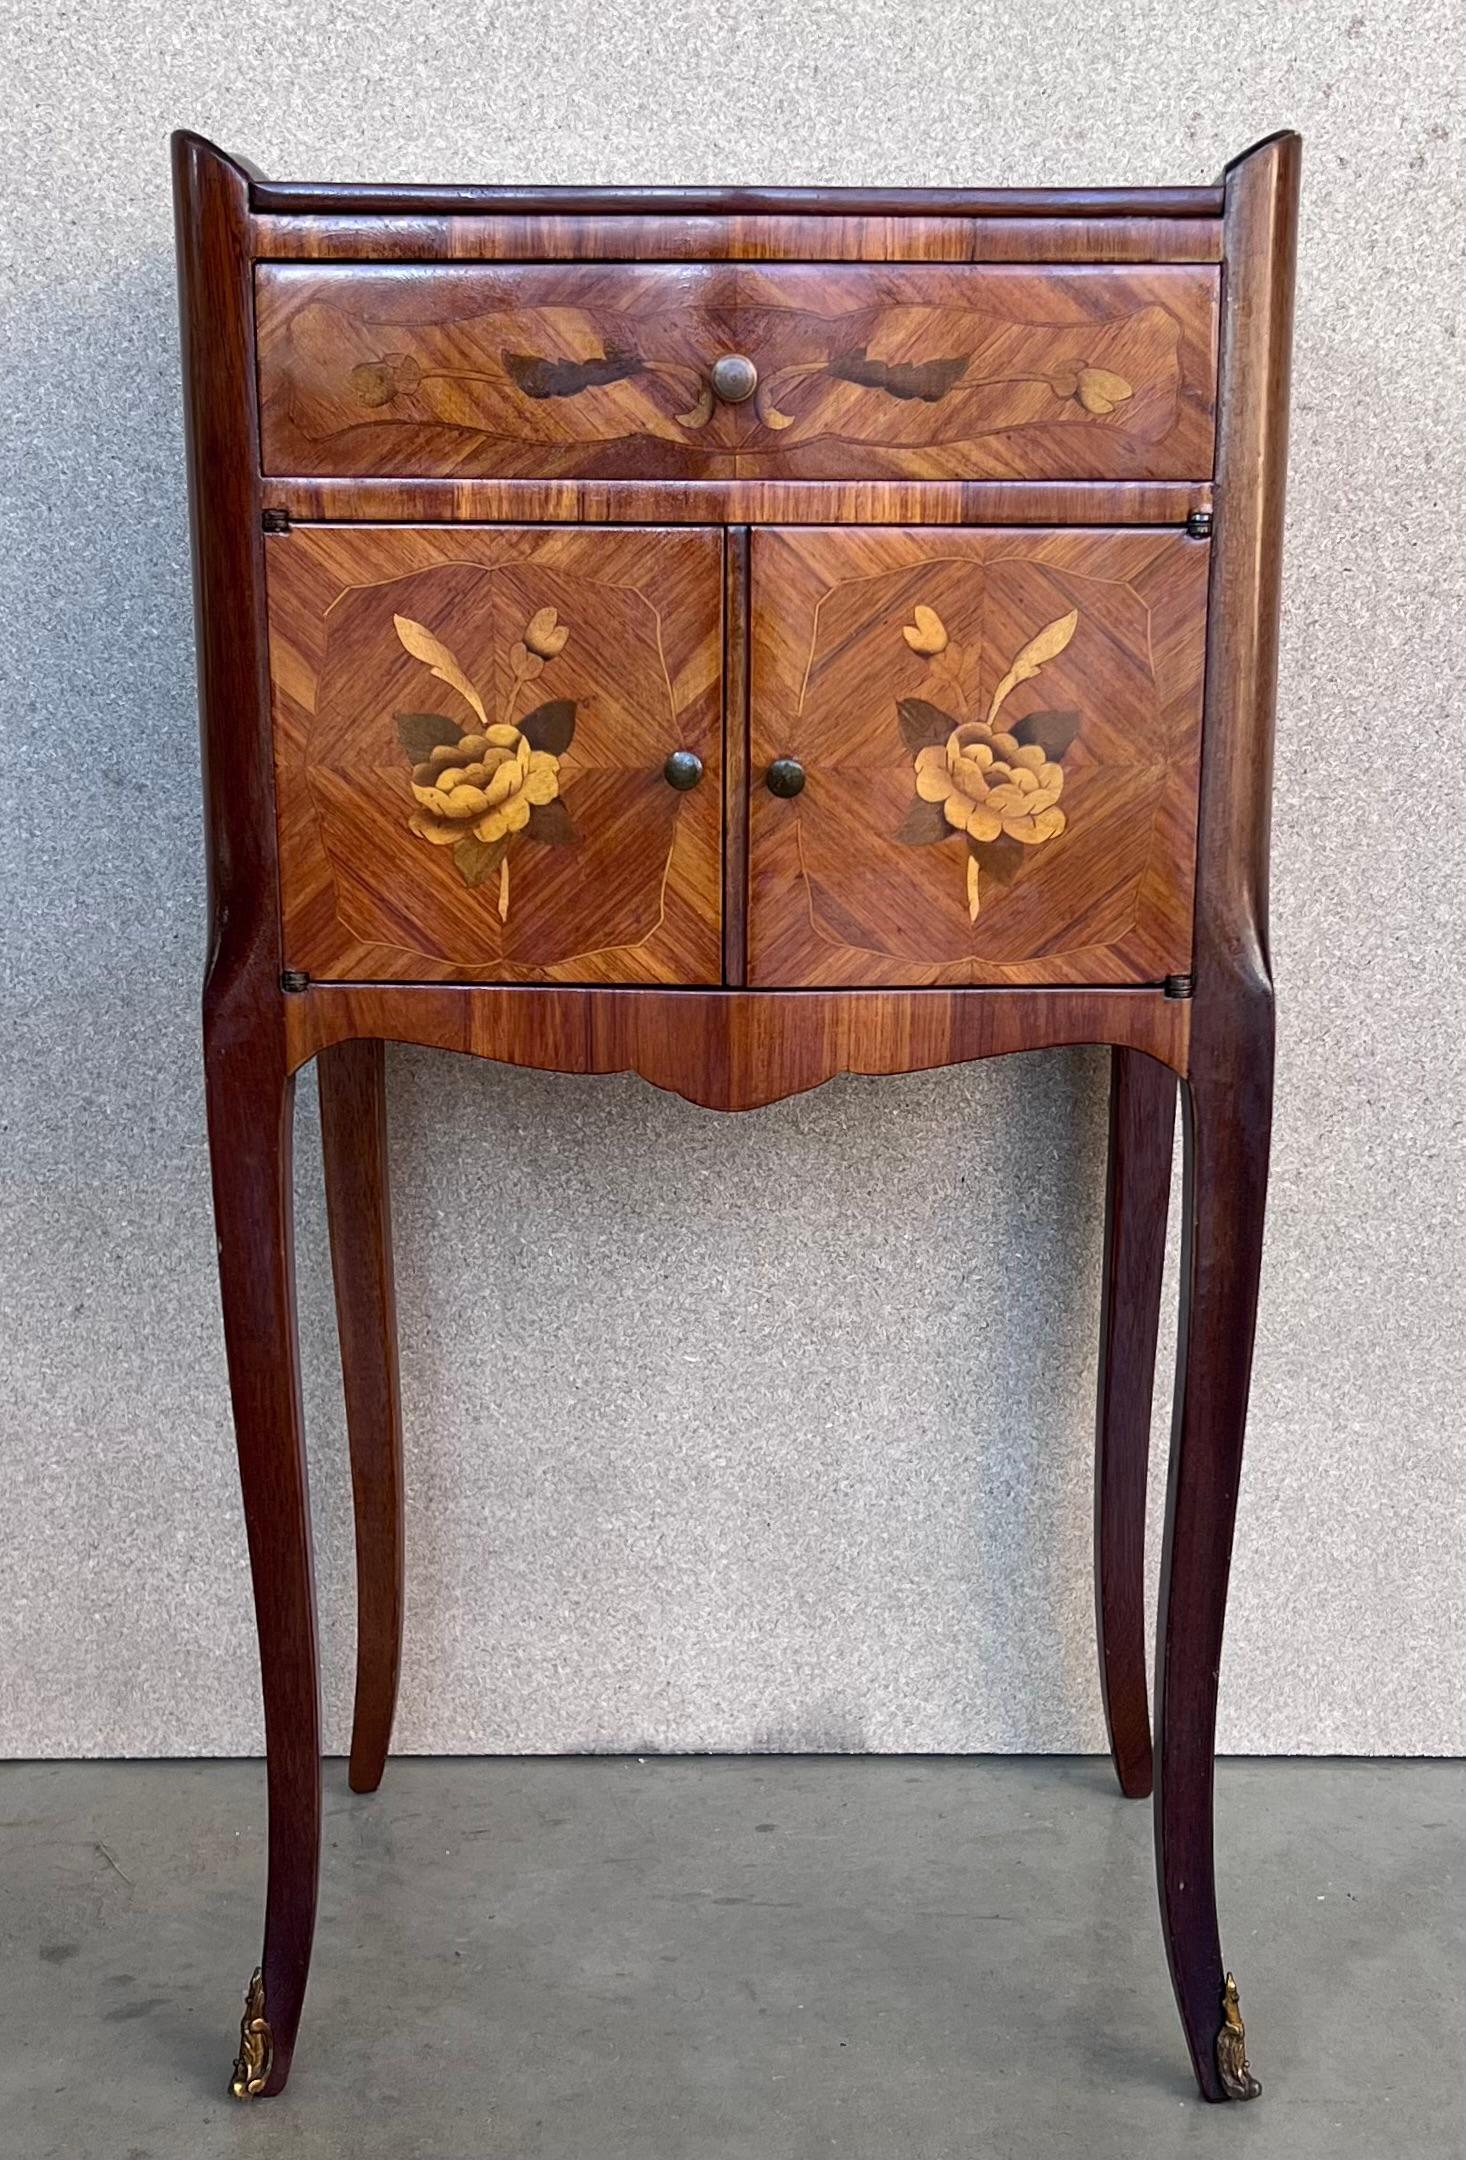 Walnut Early 20th Century French Bedside Tables or Nightstands in Marquetry and Bronze